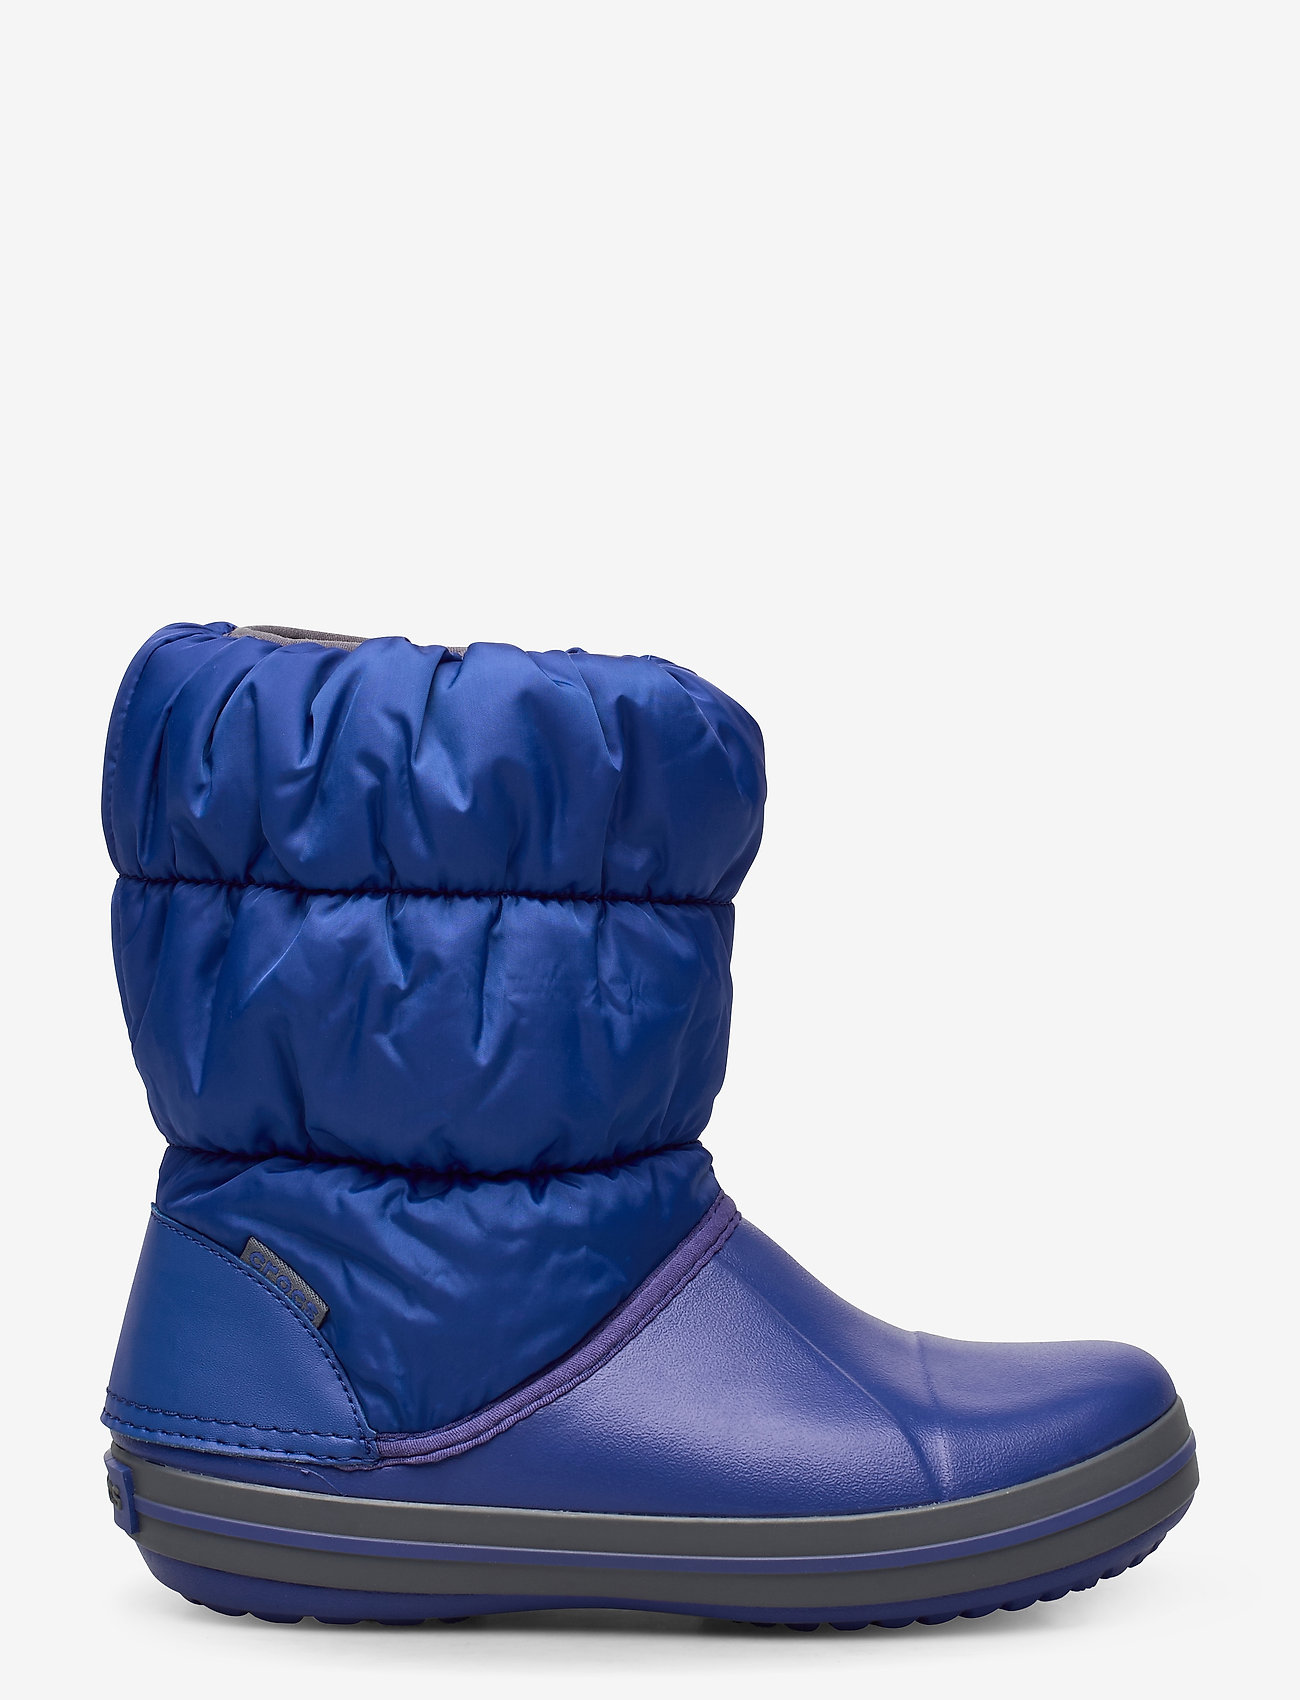 crocs boots for winter